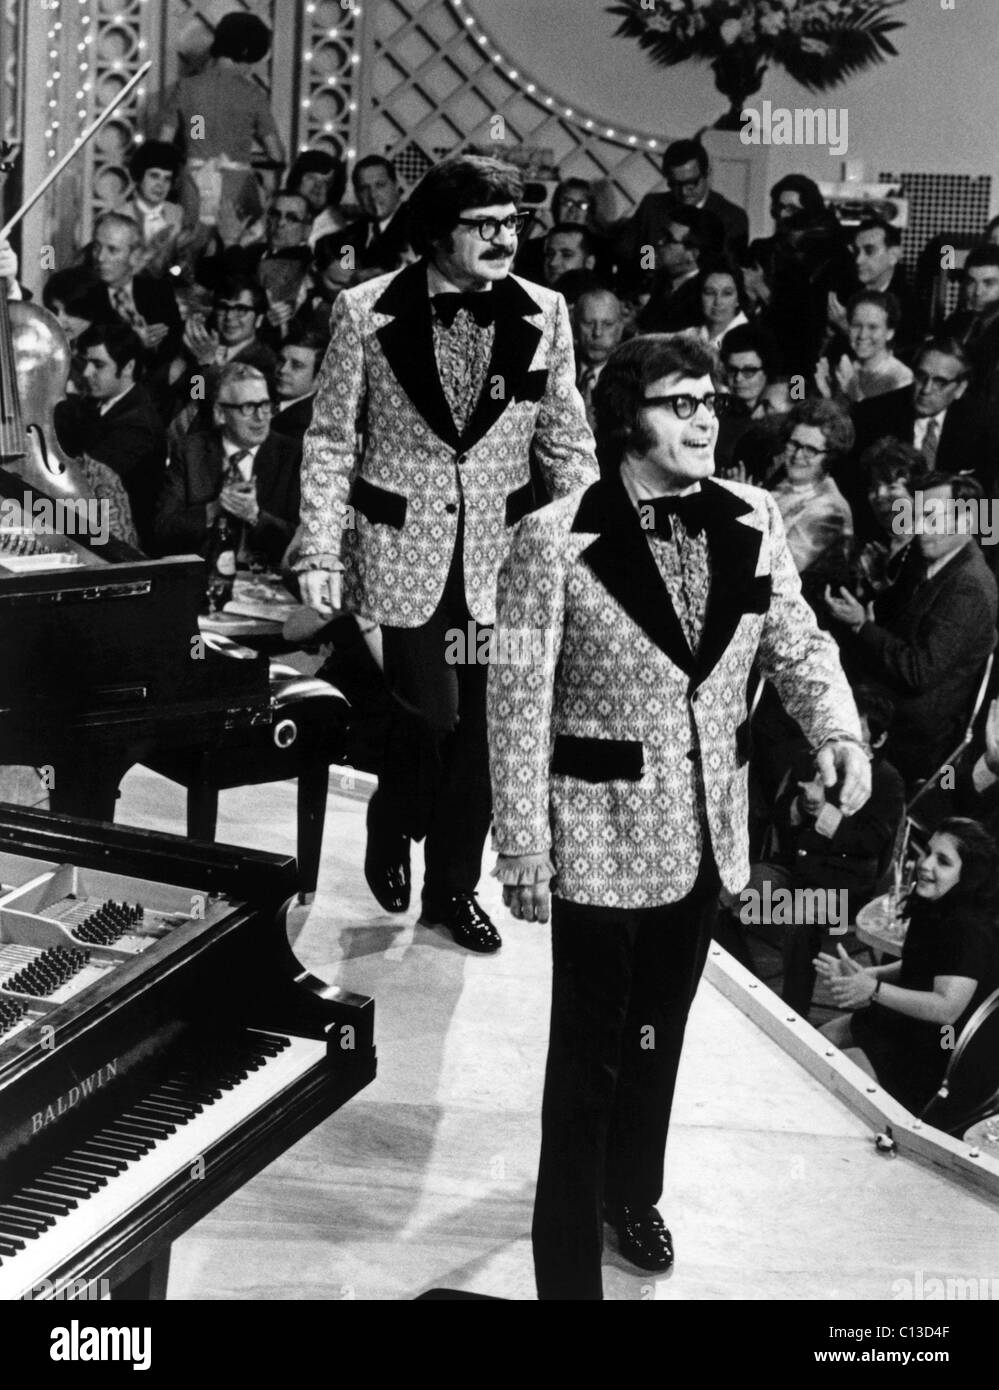 Ferrante & Teicher appearing on EVENING AT POPS in the 1970s Stock Photo